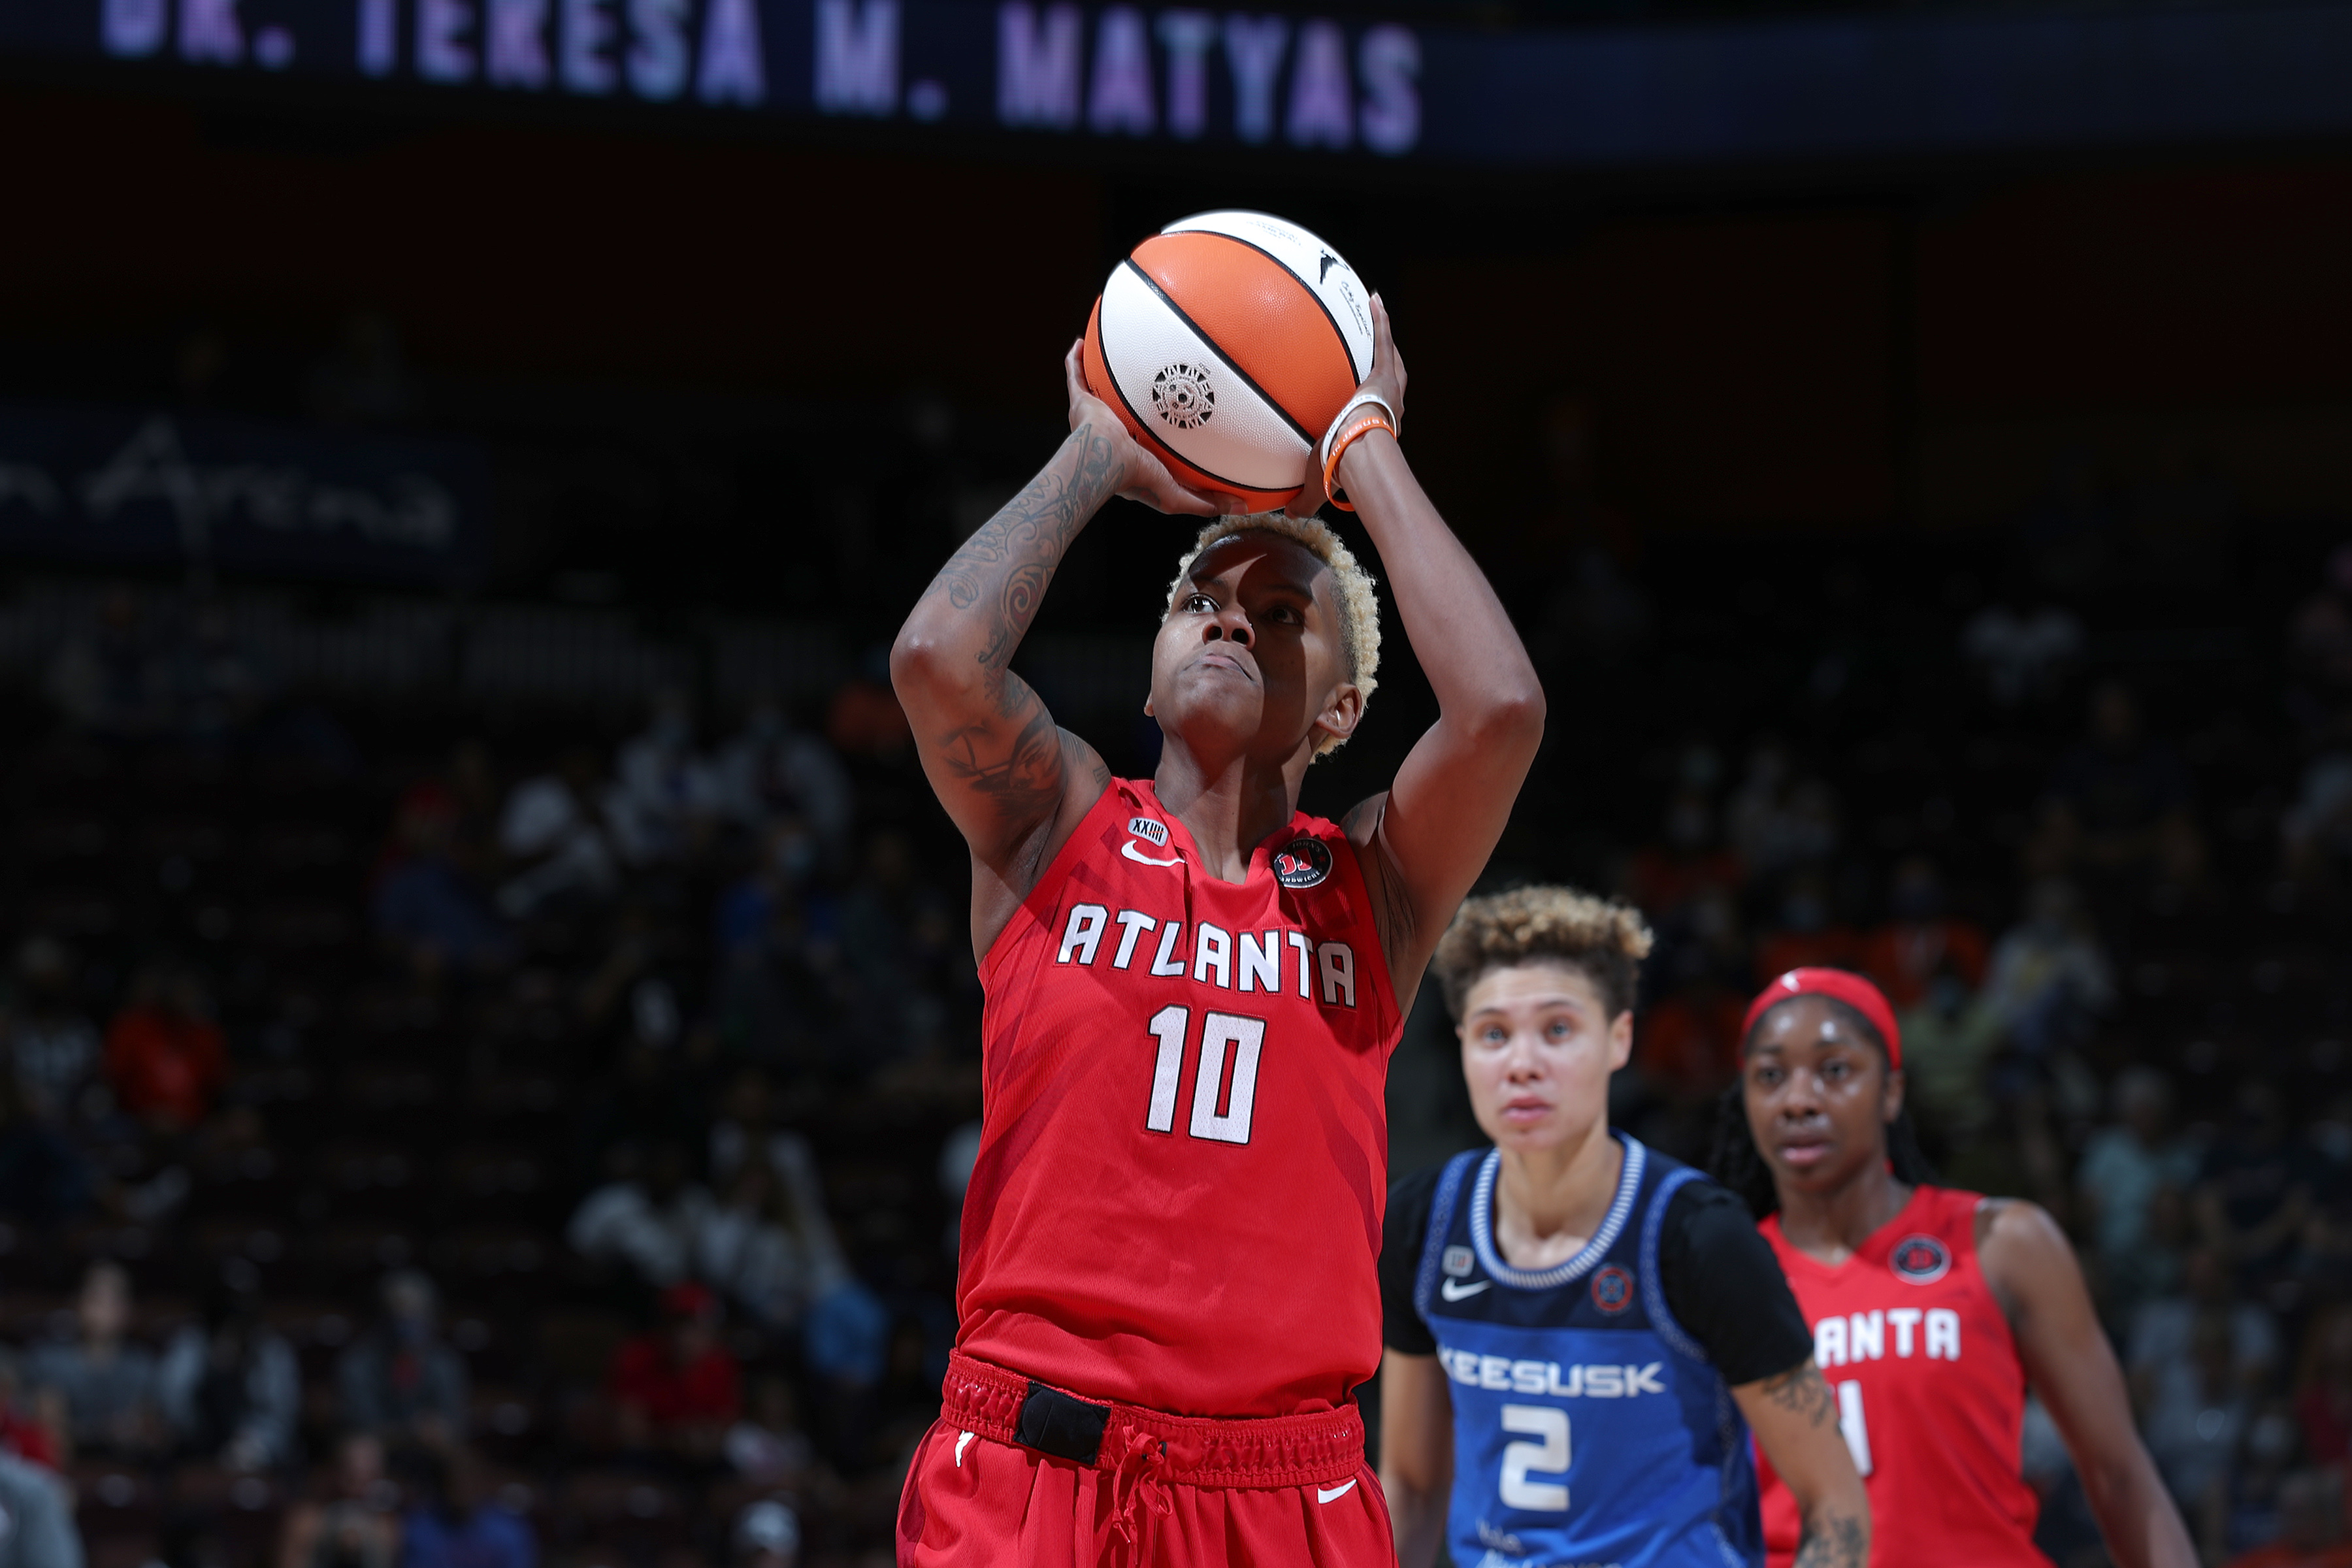 Report: Courtney Williams Expected to Sign Sun Contract After Exit from Dream